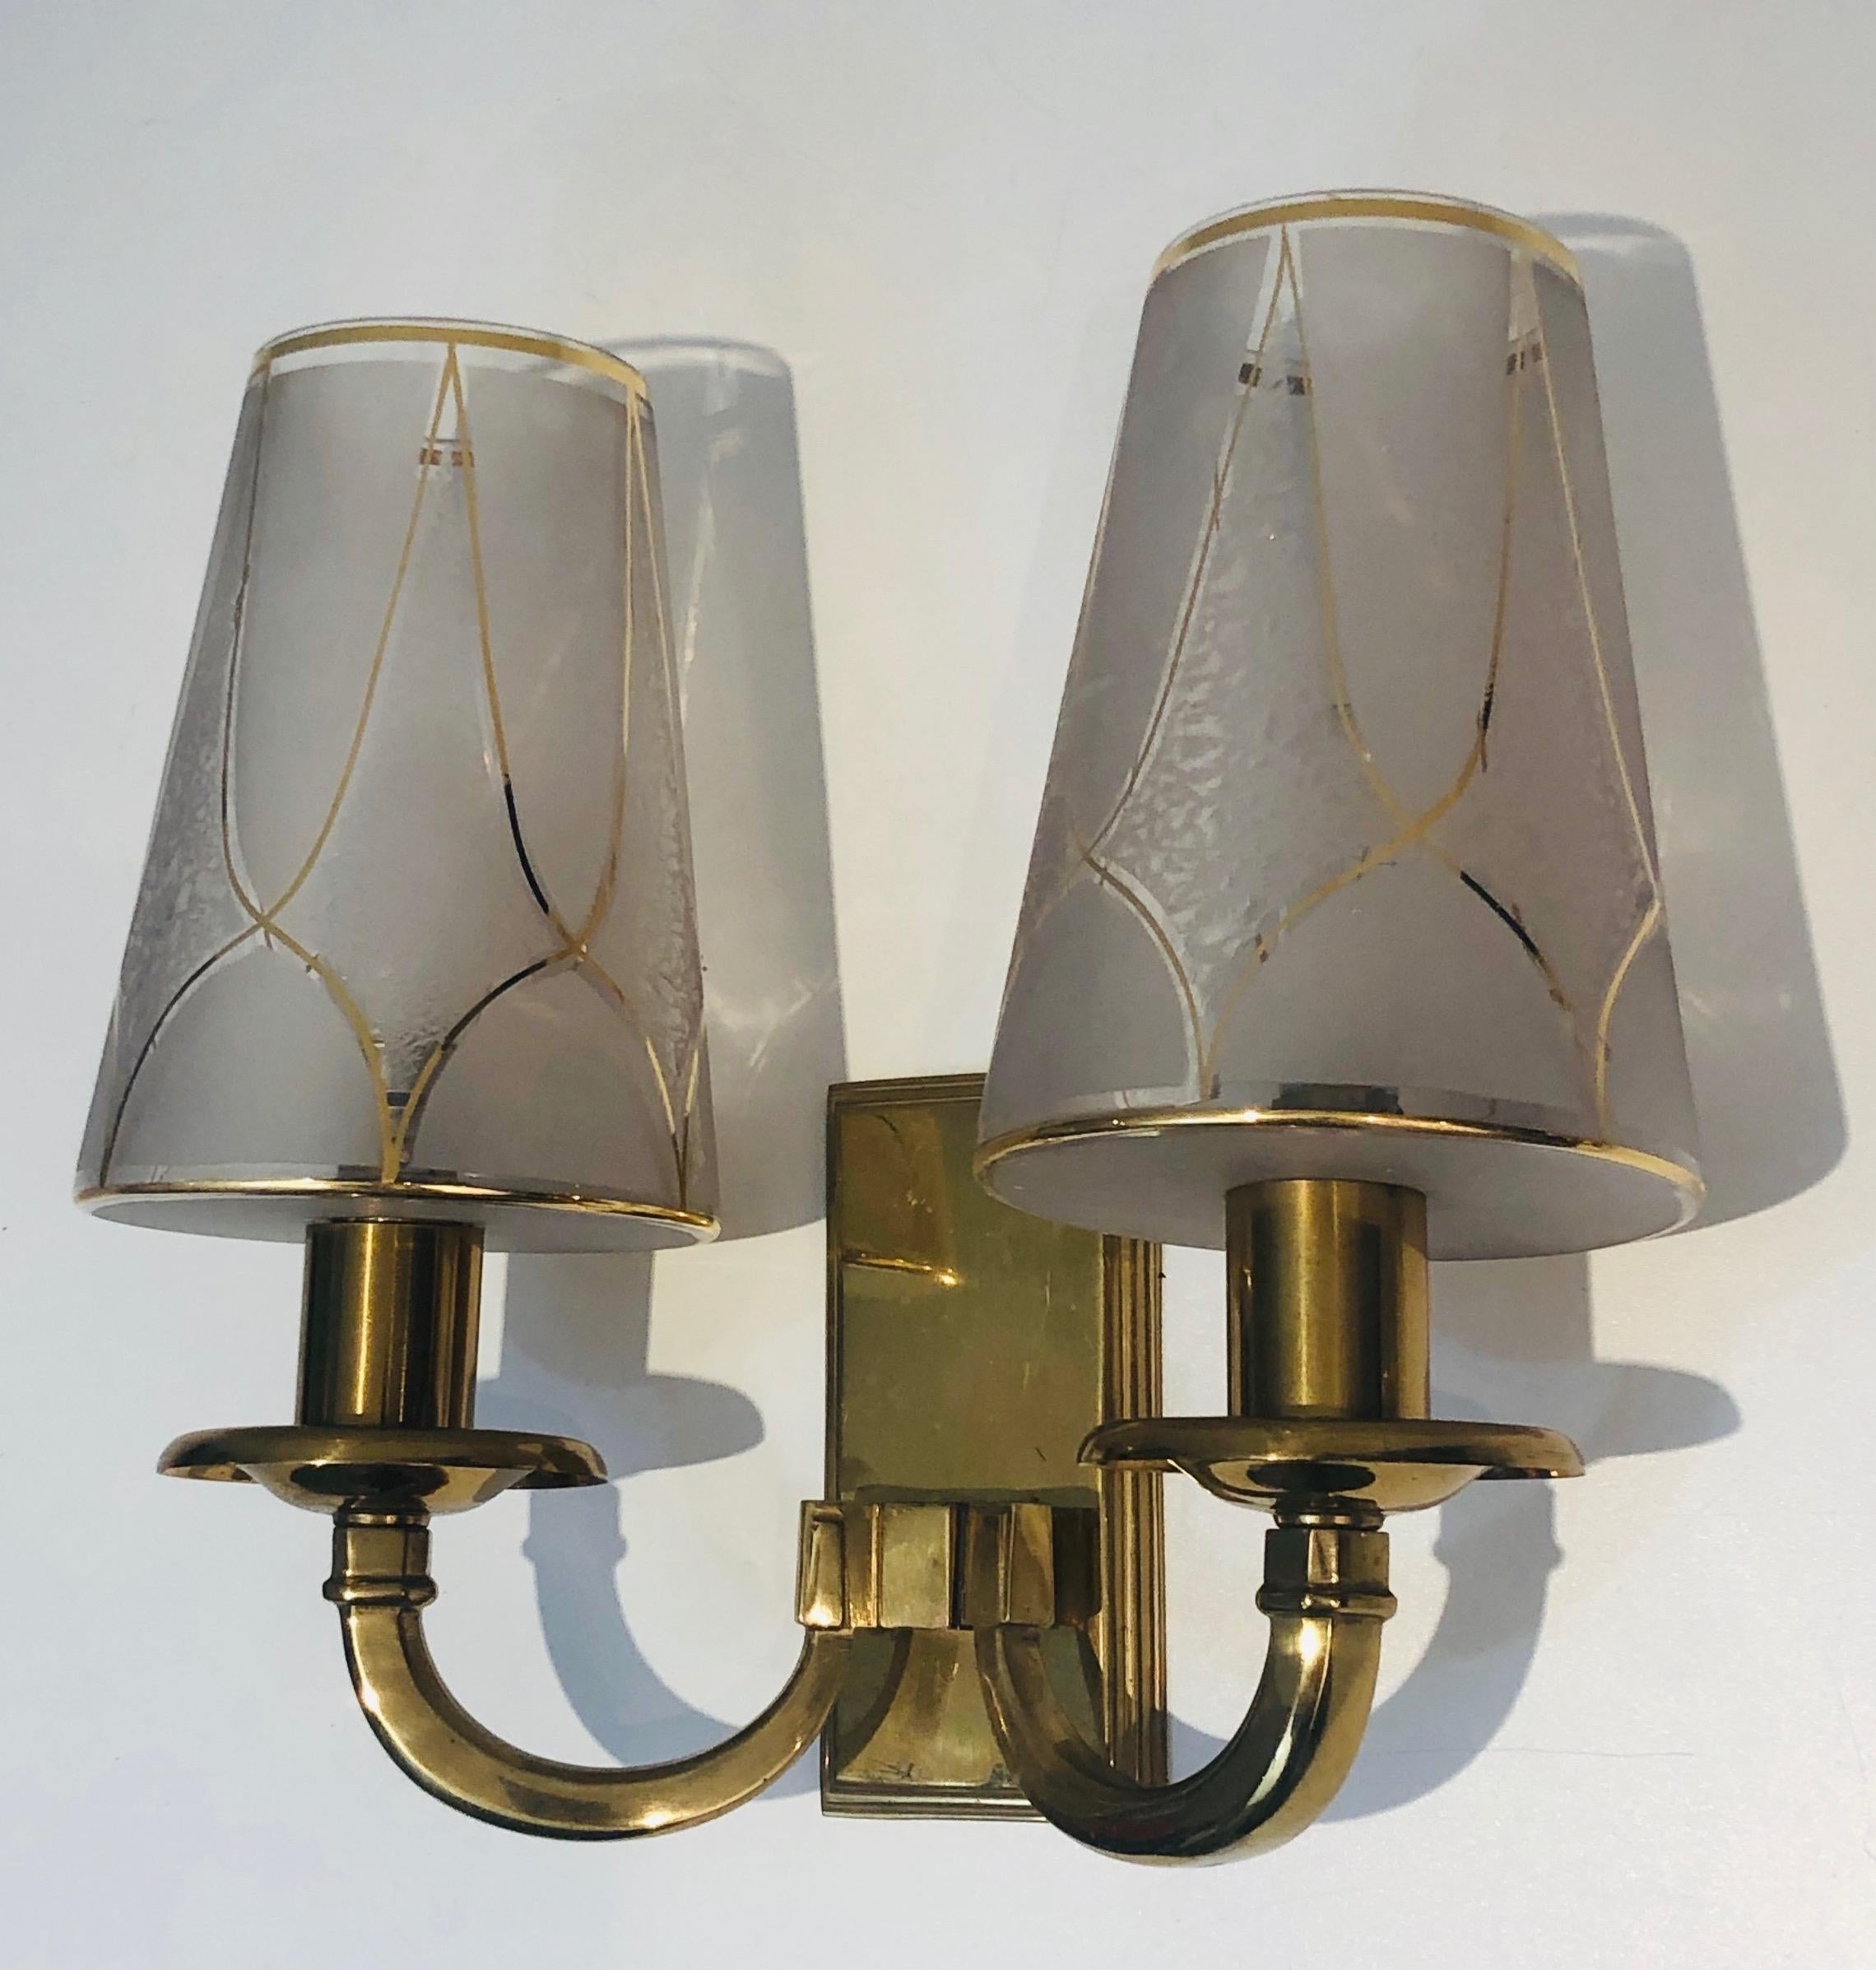 Pair of Art Deco Brass Wall Lights, French Work in the Style of Perzel, 1900's For Sale 1